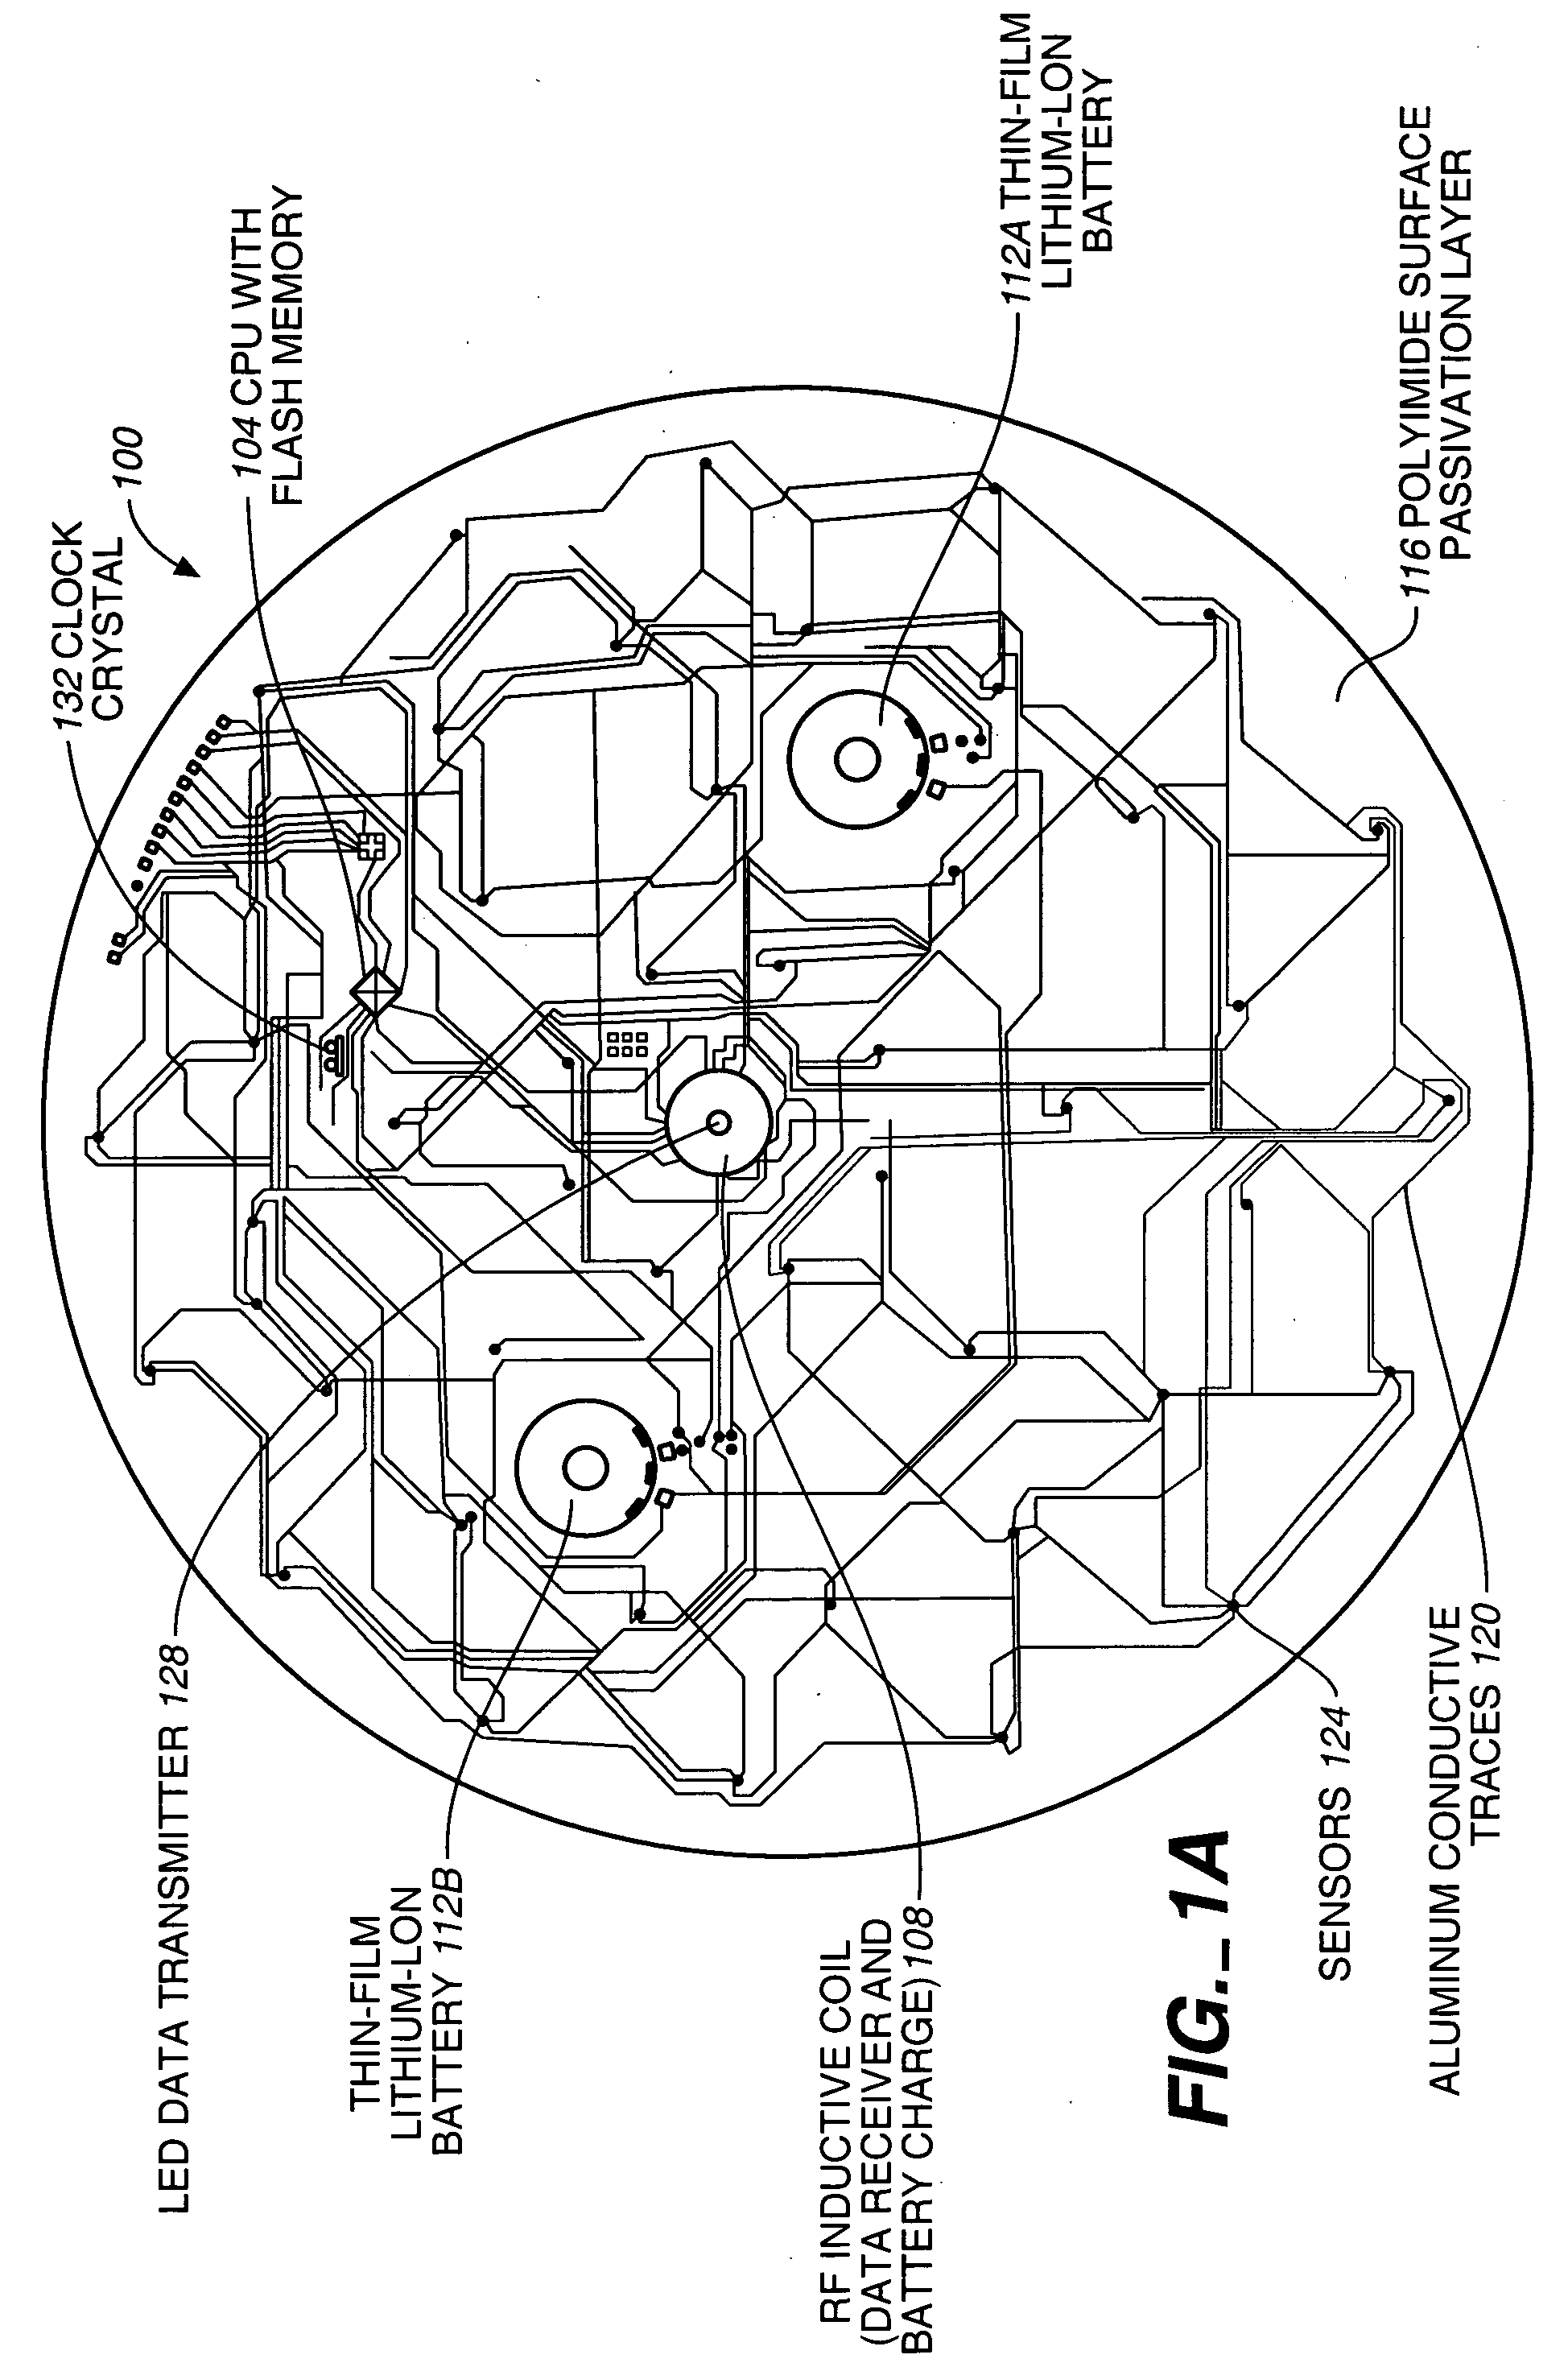 Integrated process condition sensing wafer and data analysis system